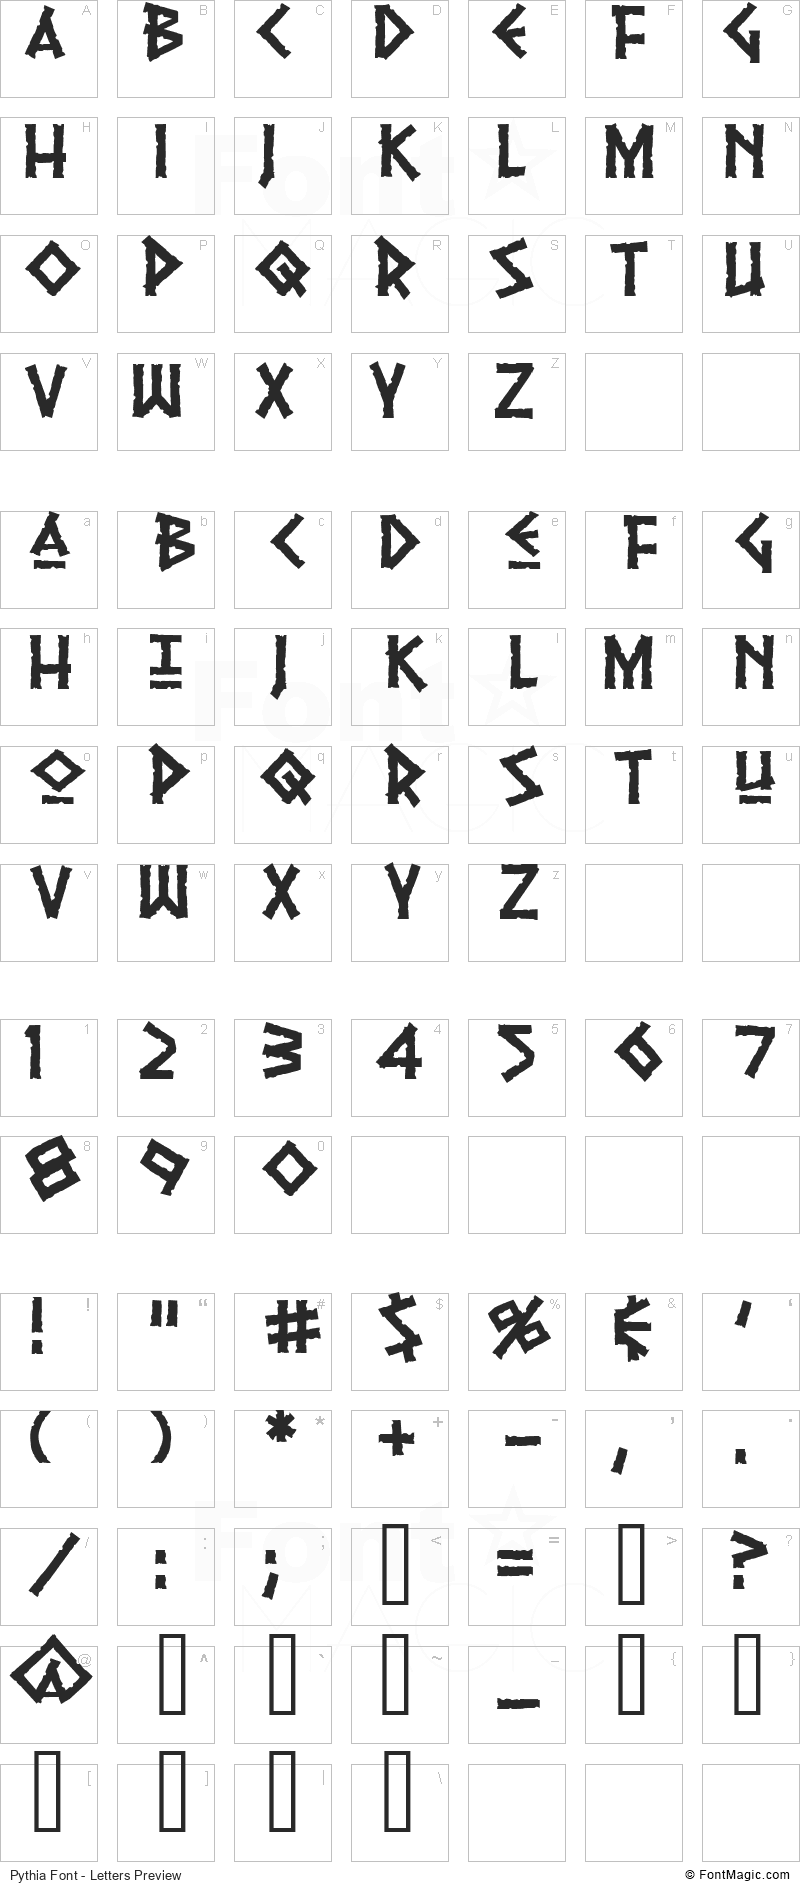 Pythia Font - All Latters Preview Chart